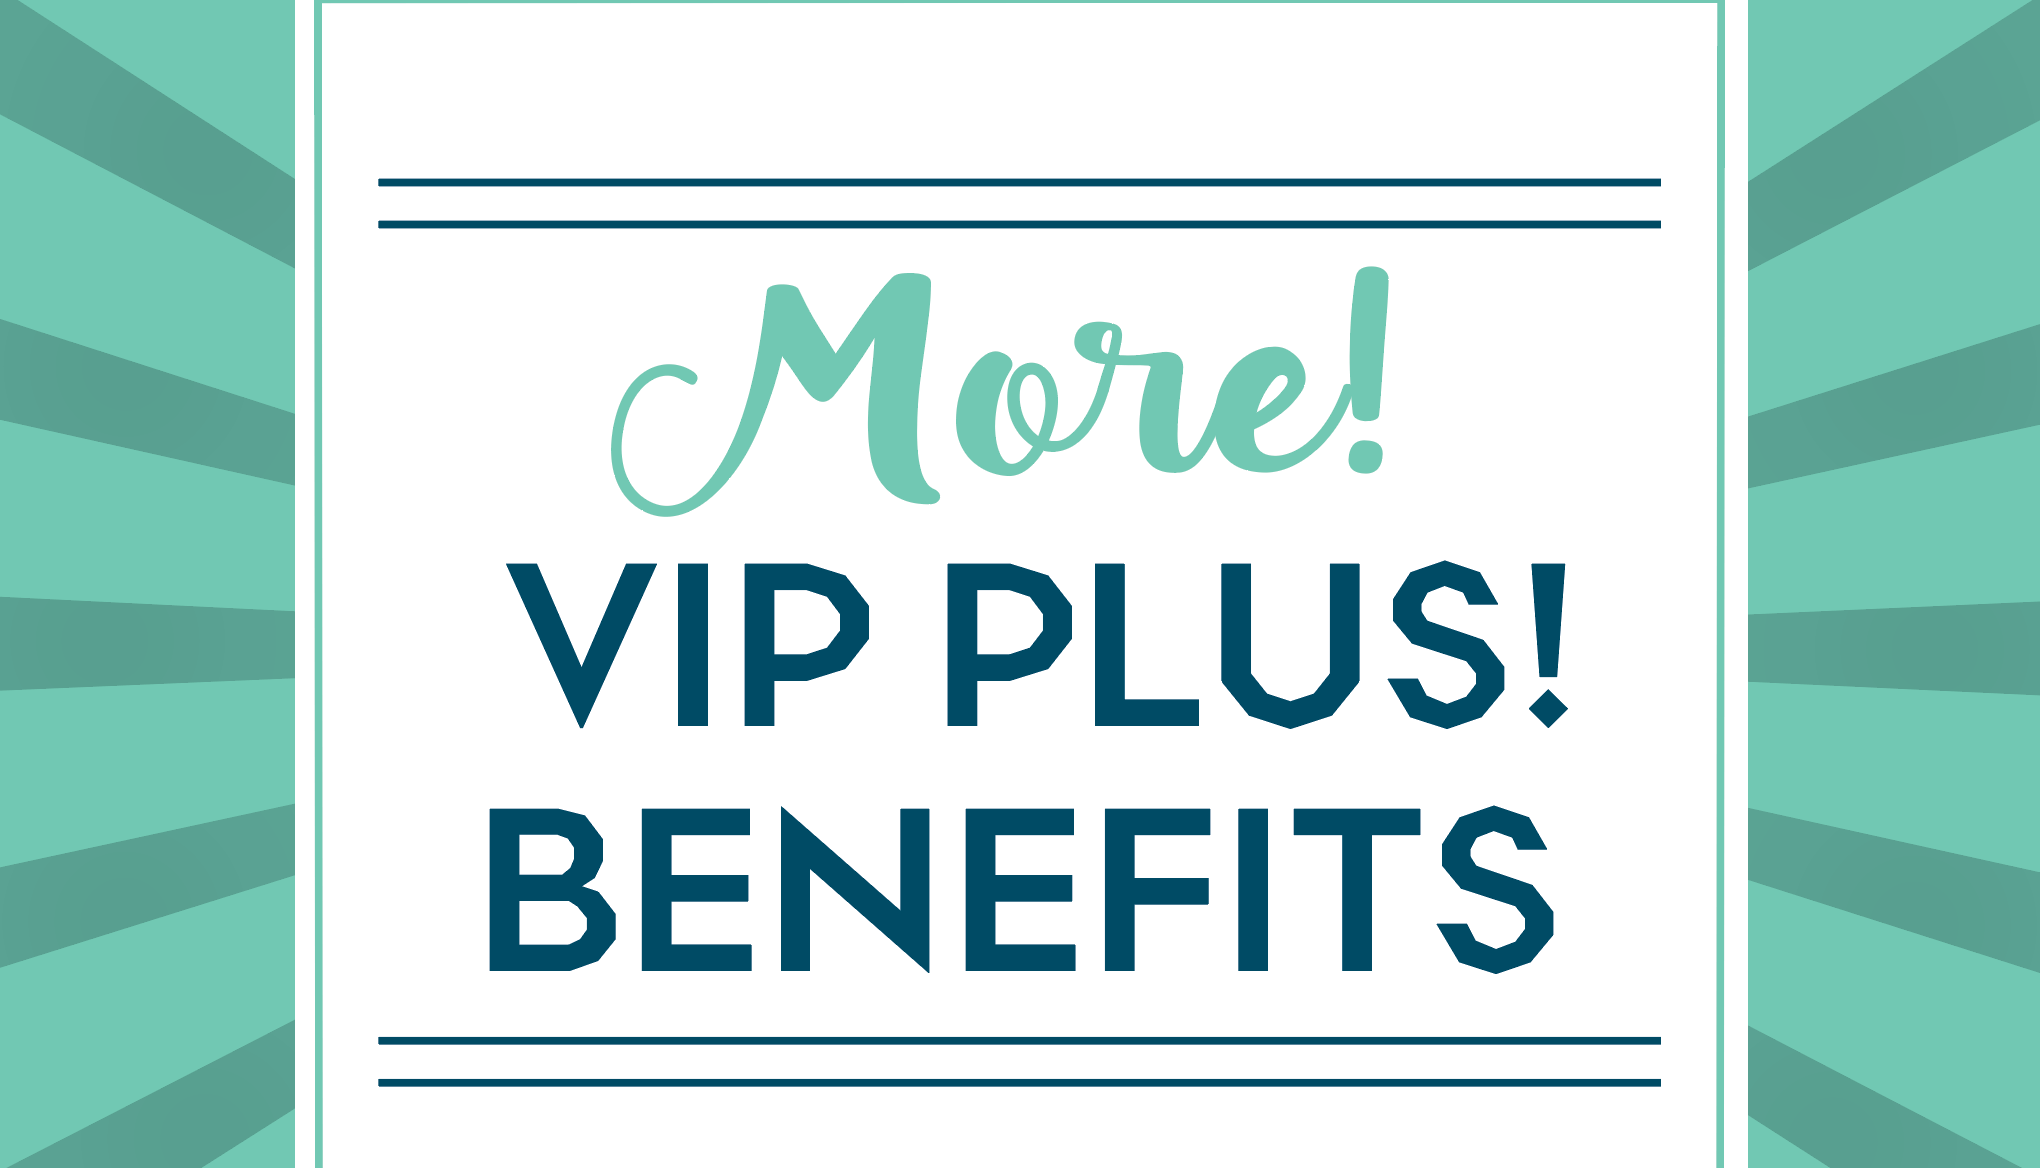 Expanded VIP Plus! Benefits